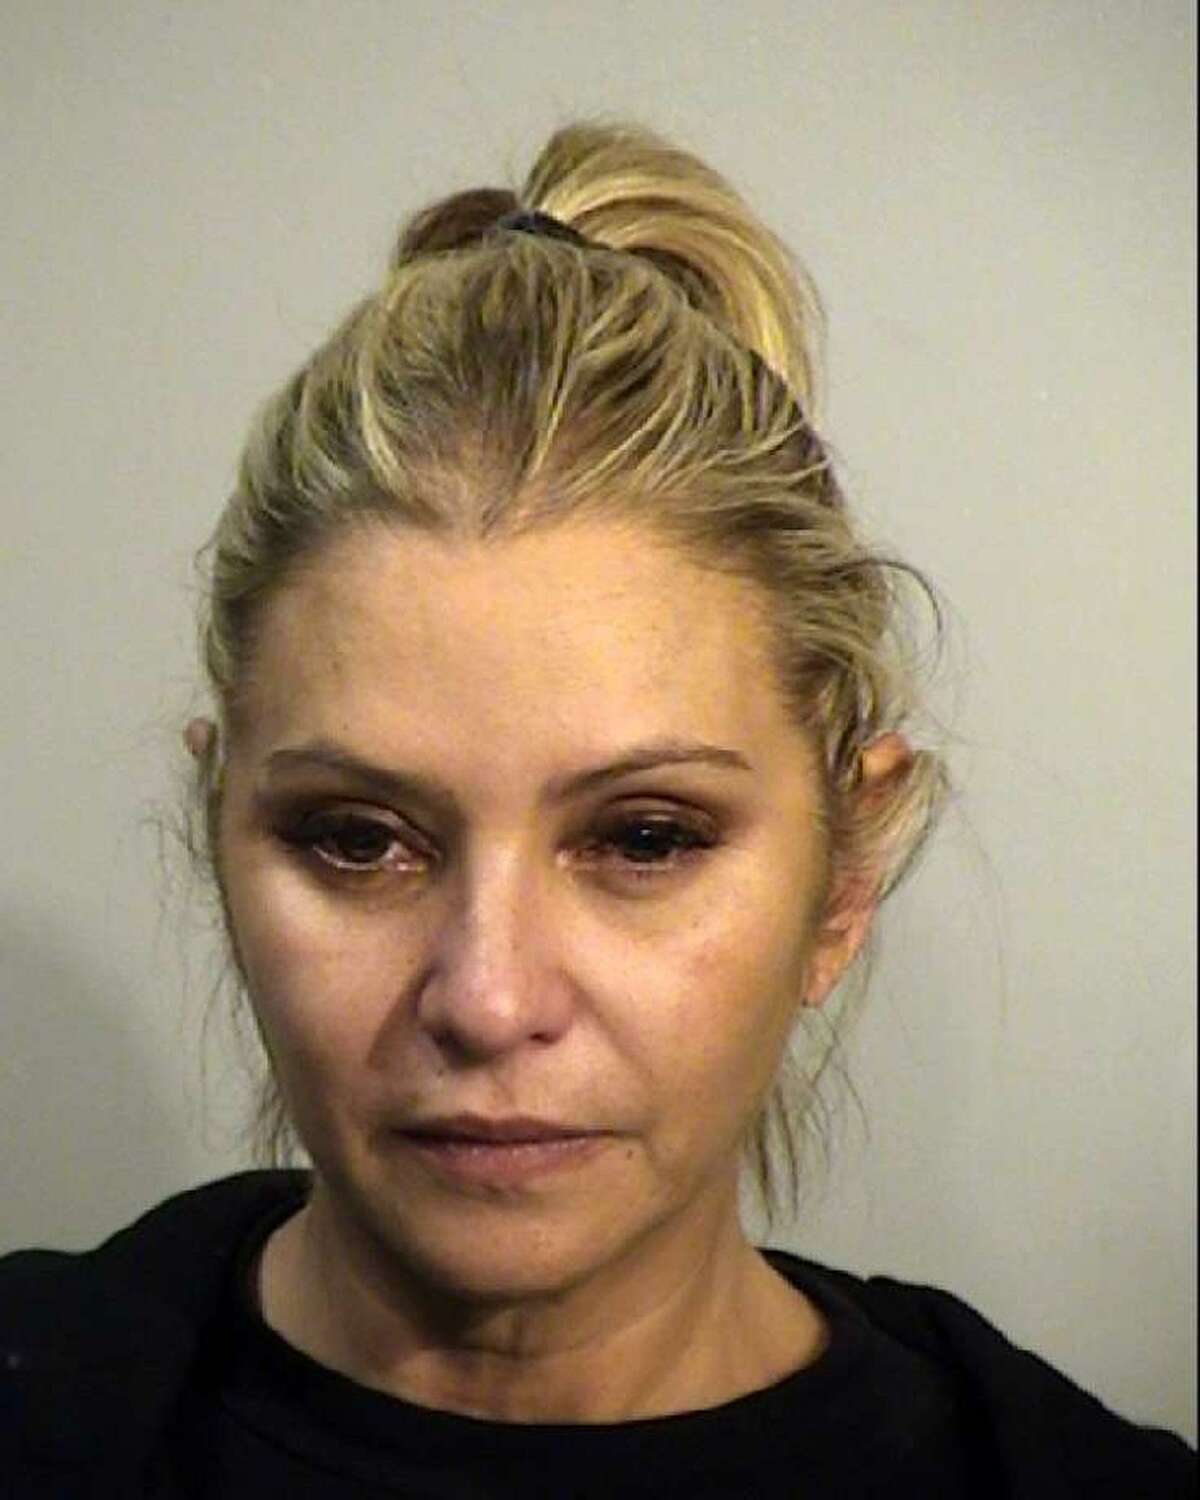 Danielle Stefani Arellano, 52, also known as Daniela Castro, seen in an undated courtesy photo provided by the Bexar County Sheriff Office, was arrested in September but the charges were later dropped.